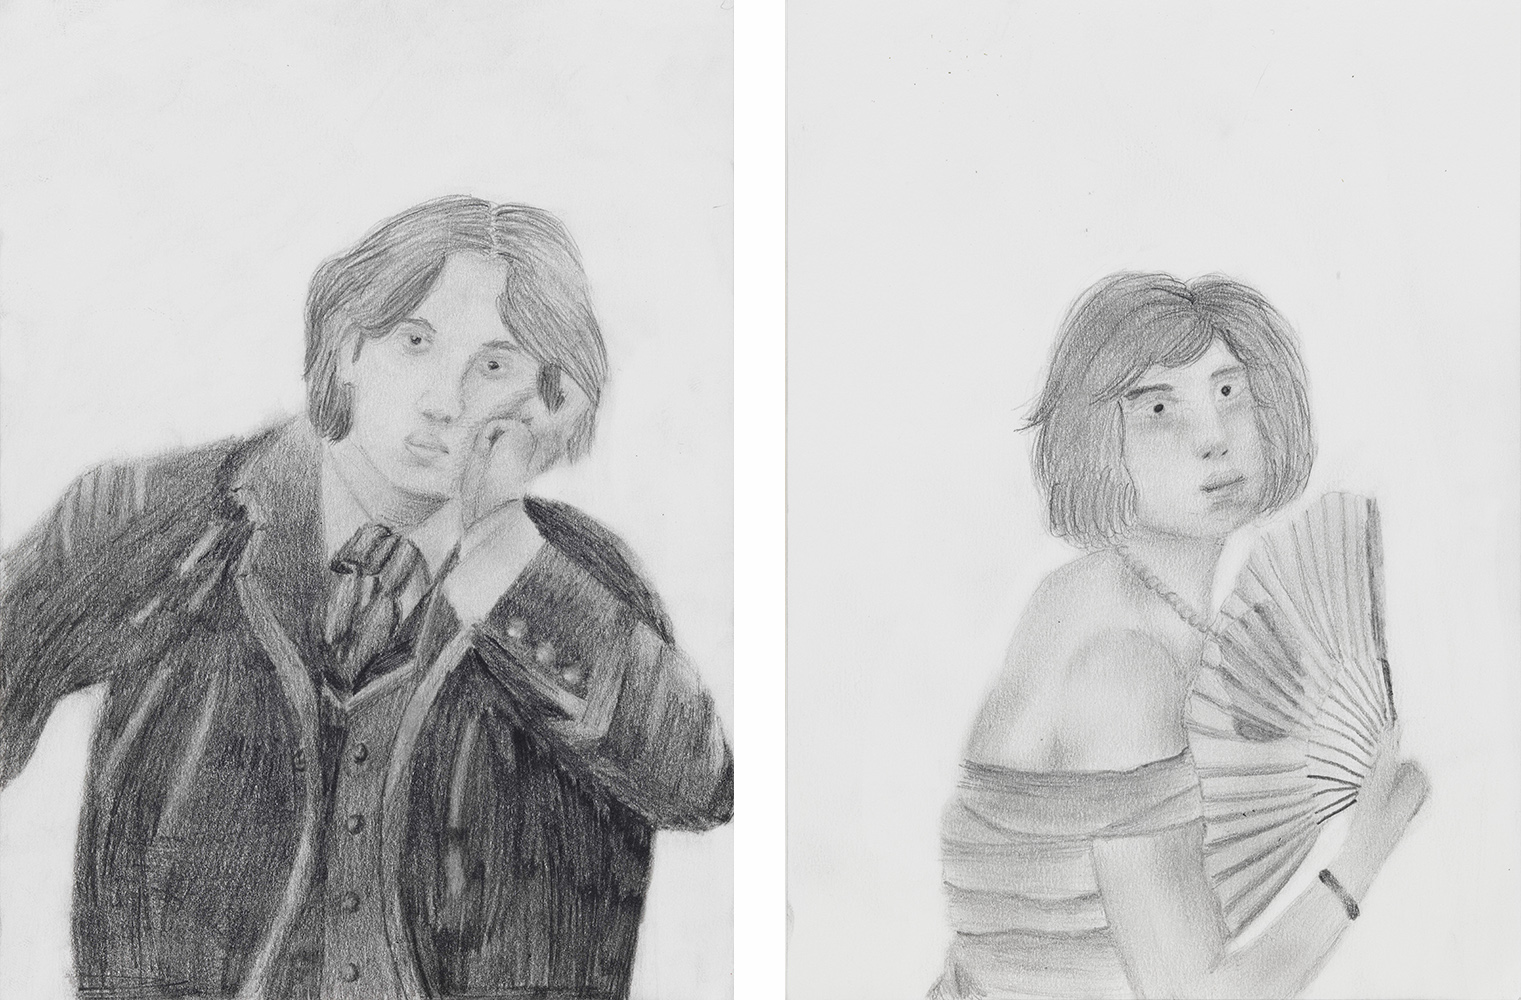 Two pencil drawings, one of Oscar Wilde and one of Lili Elbe